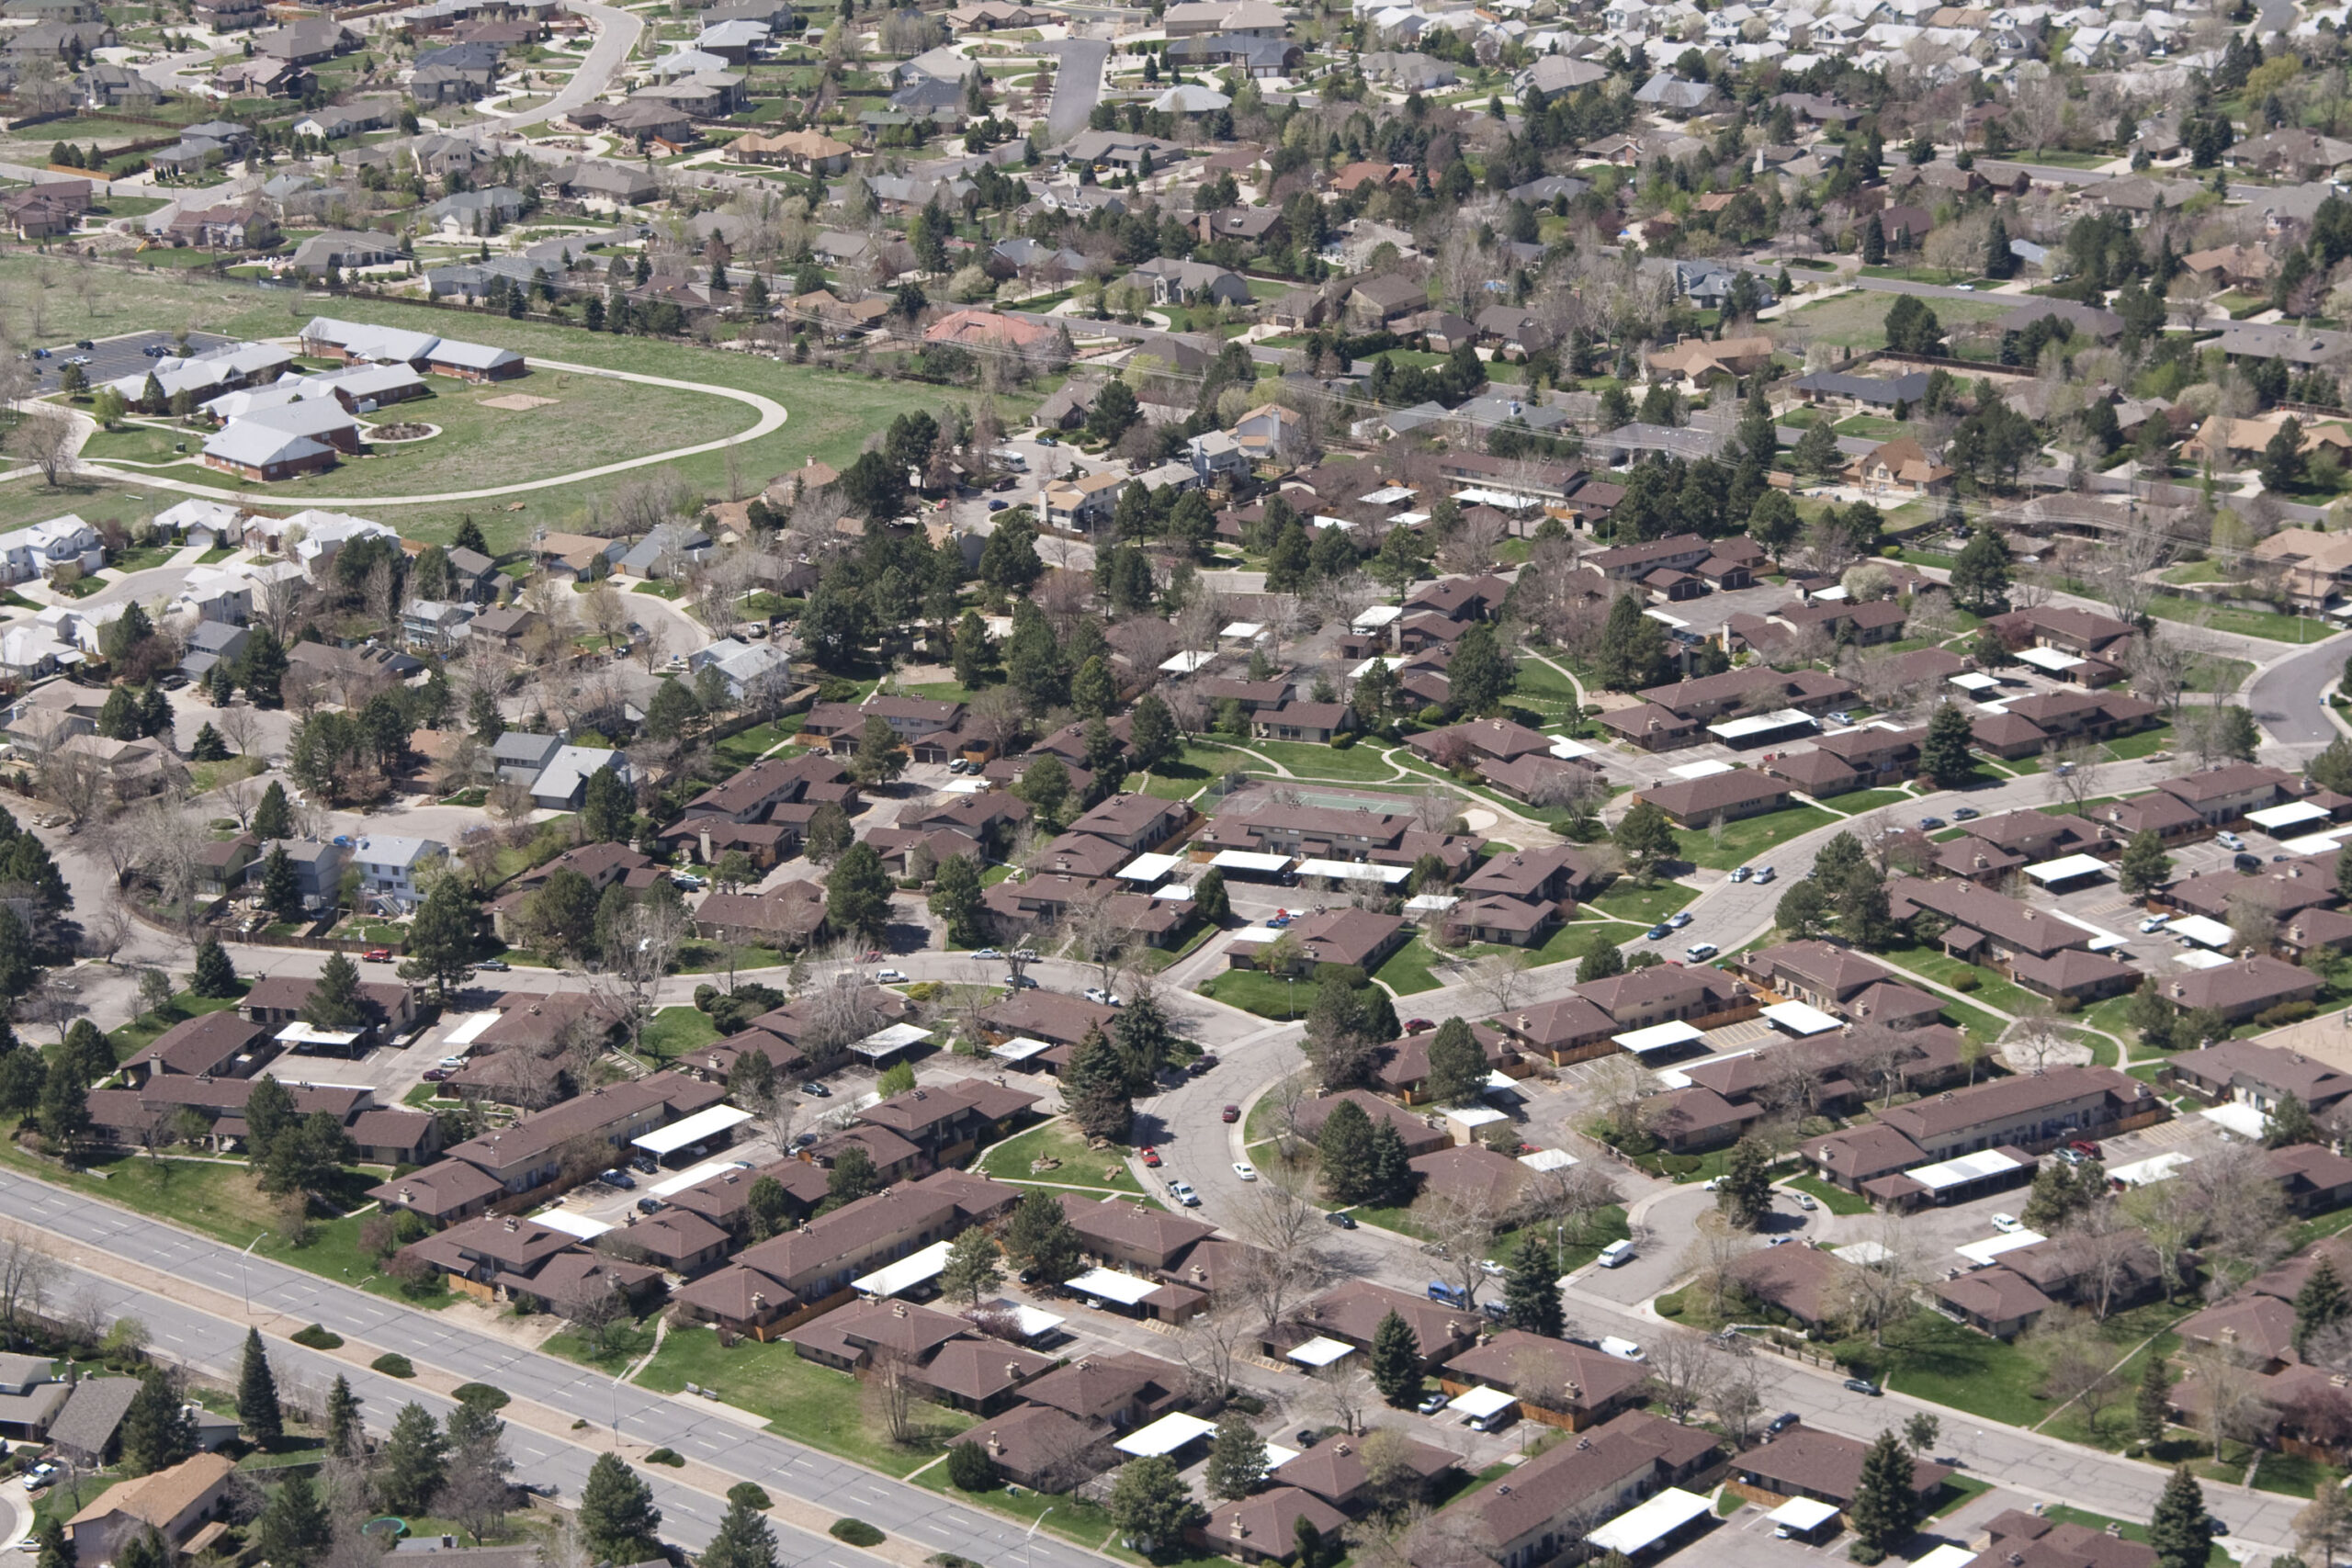 The image depicts a residential area near Denver, Colorado, with a view from above that showcases the houses and streets, greenery, and a clear view of the surrounding environment. The area is characterized by a number of homes with similar roofing, likely indicating a suburban neighborhood with well-organized streets and landscaping.